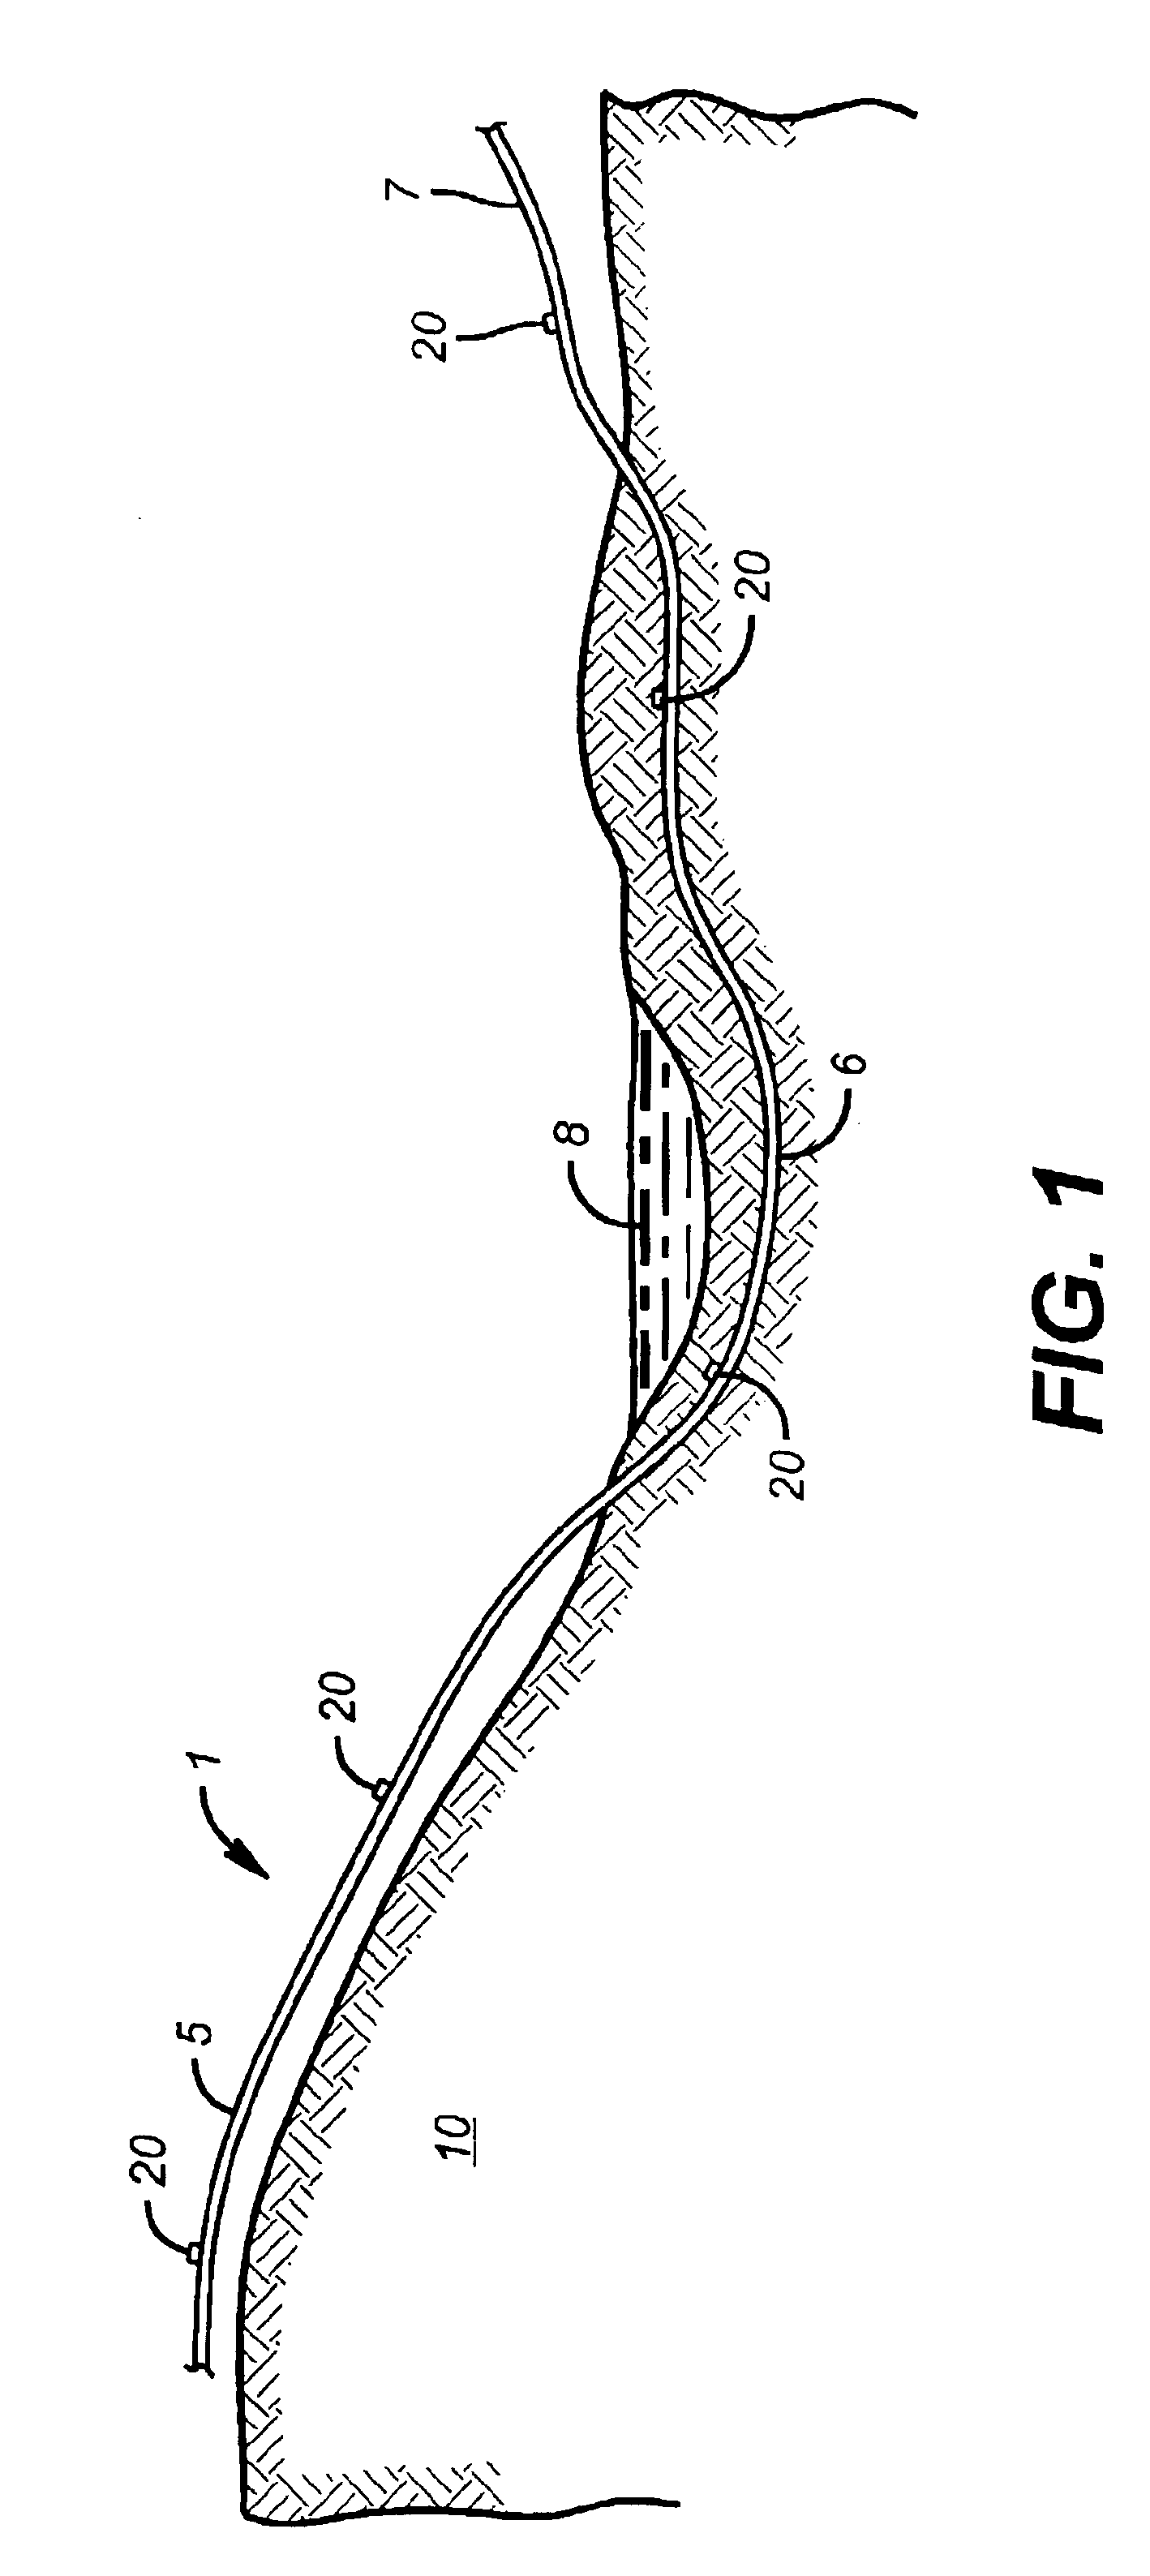 Apparatus and methods for remote monitoring of flow conduits